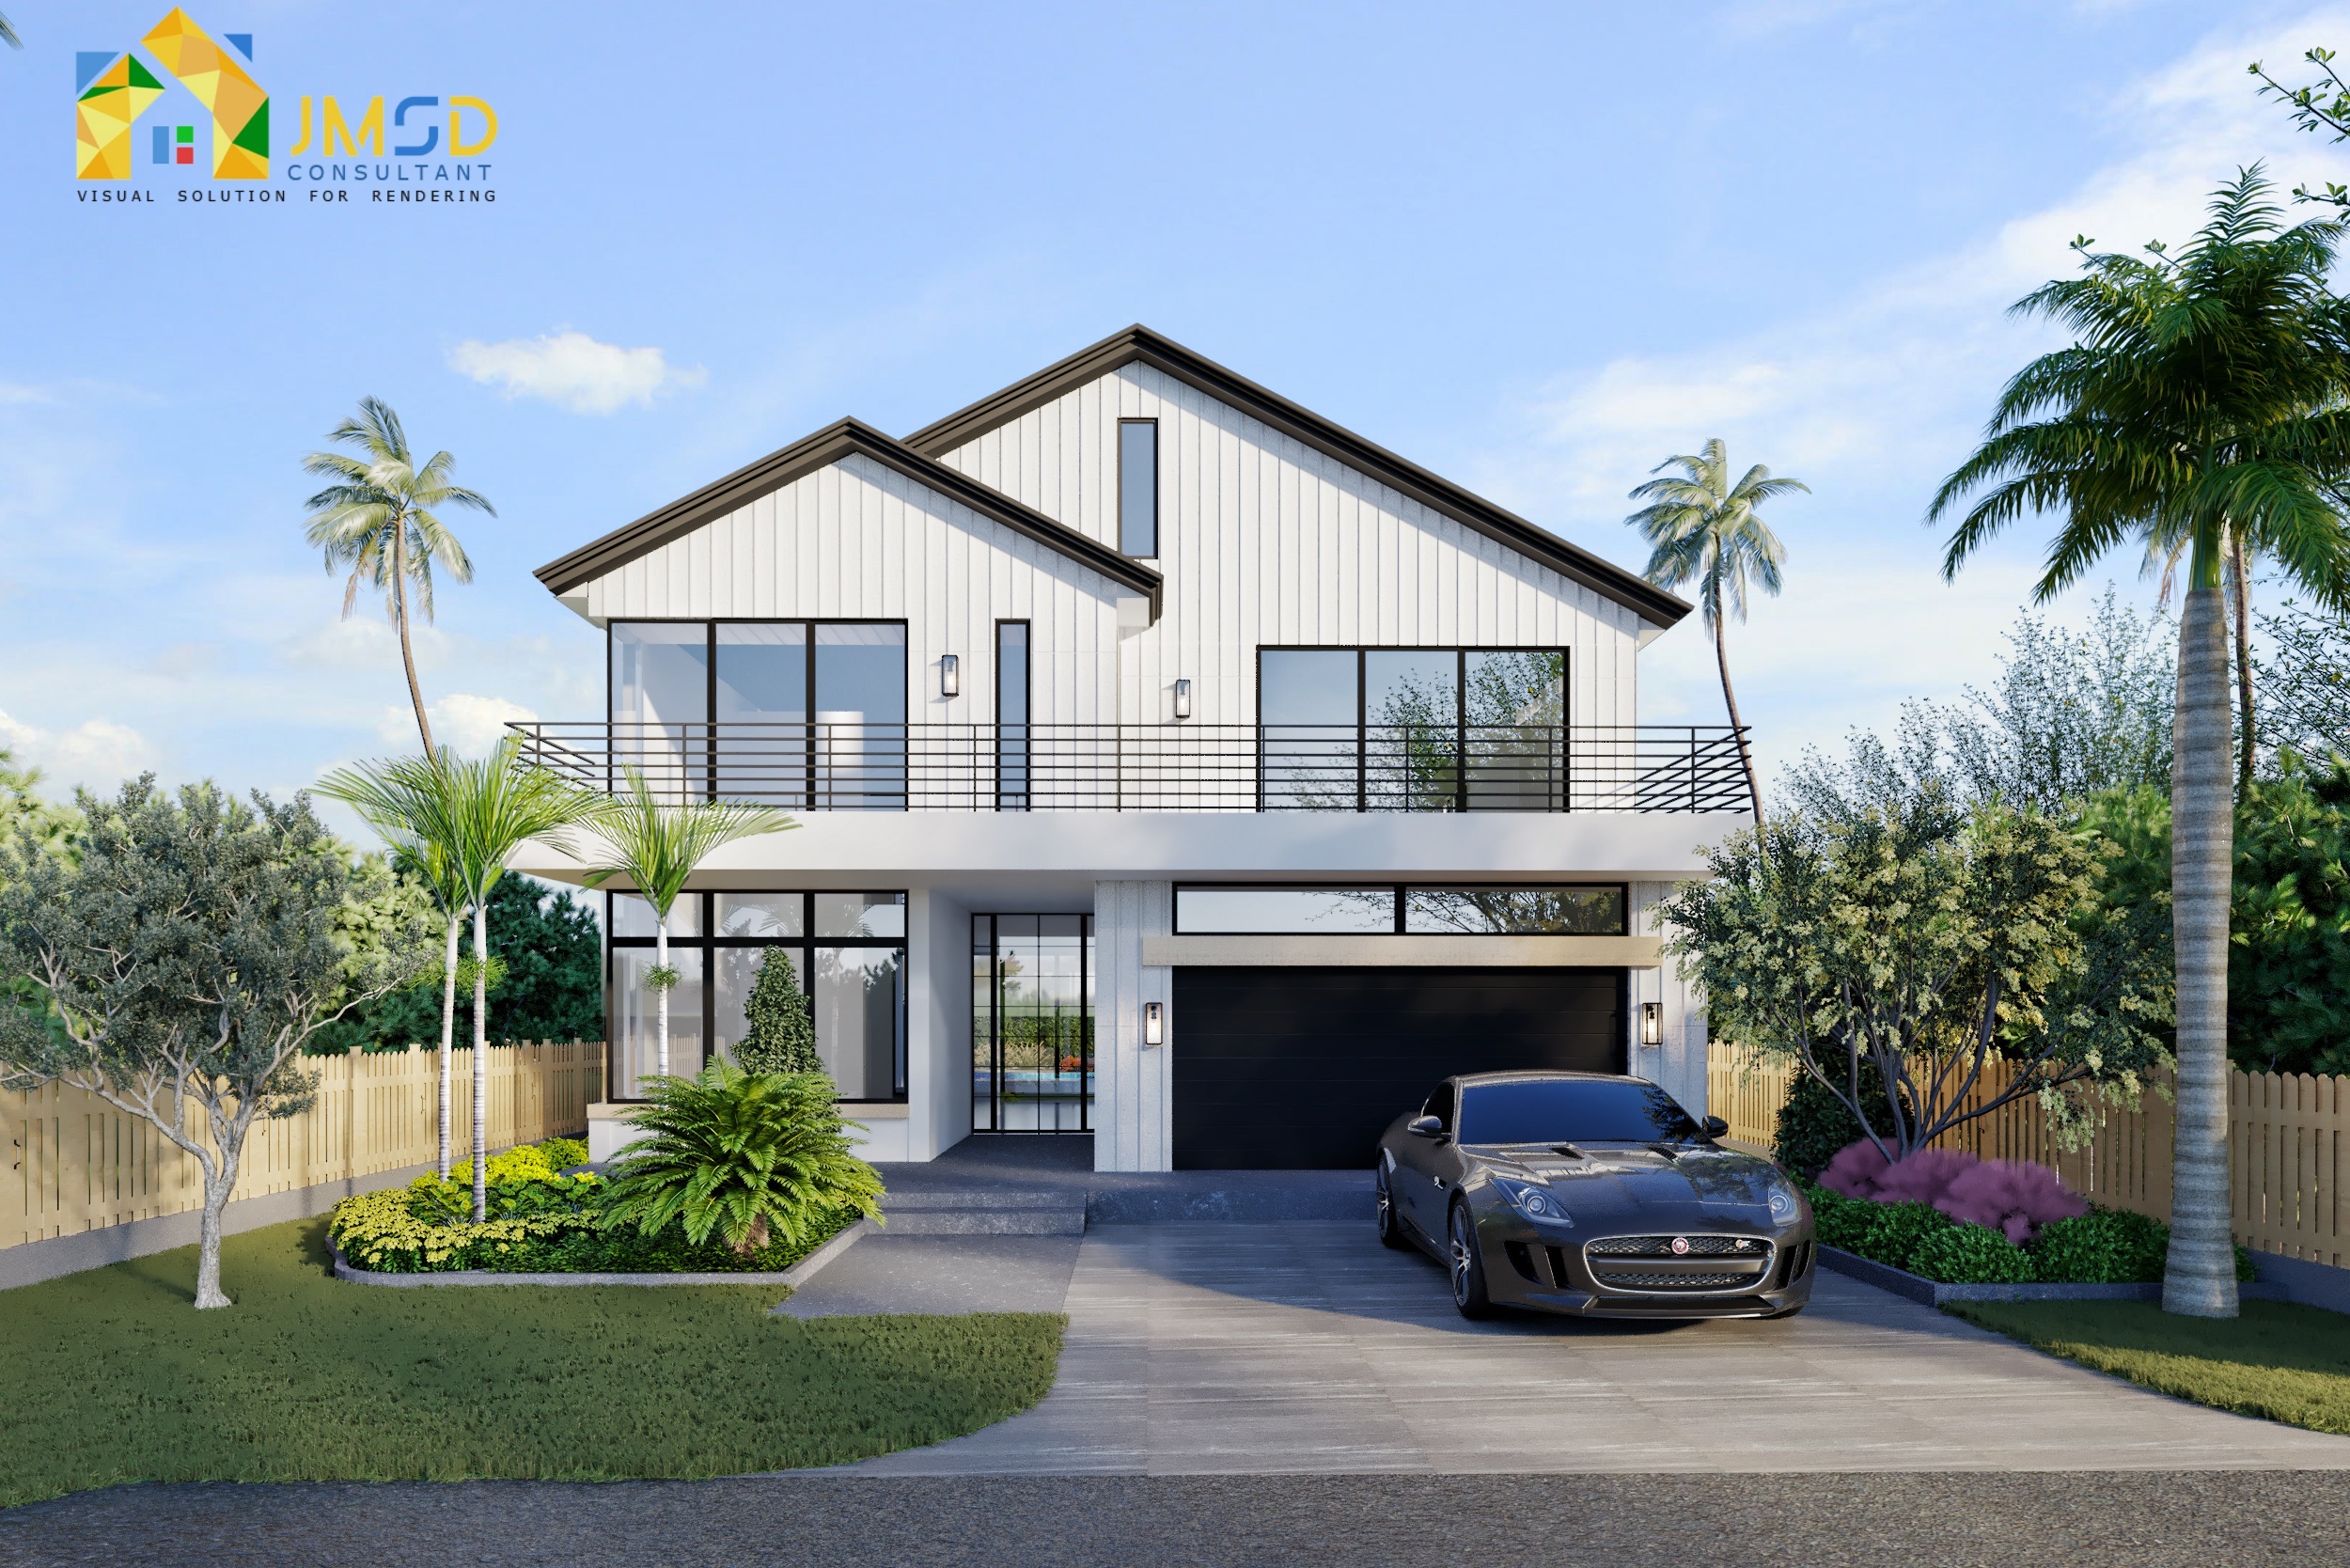 CGMEETUP - Residential Home Rendering with Landscape ...